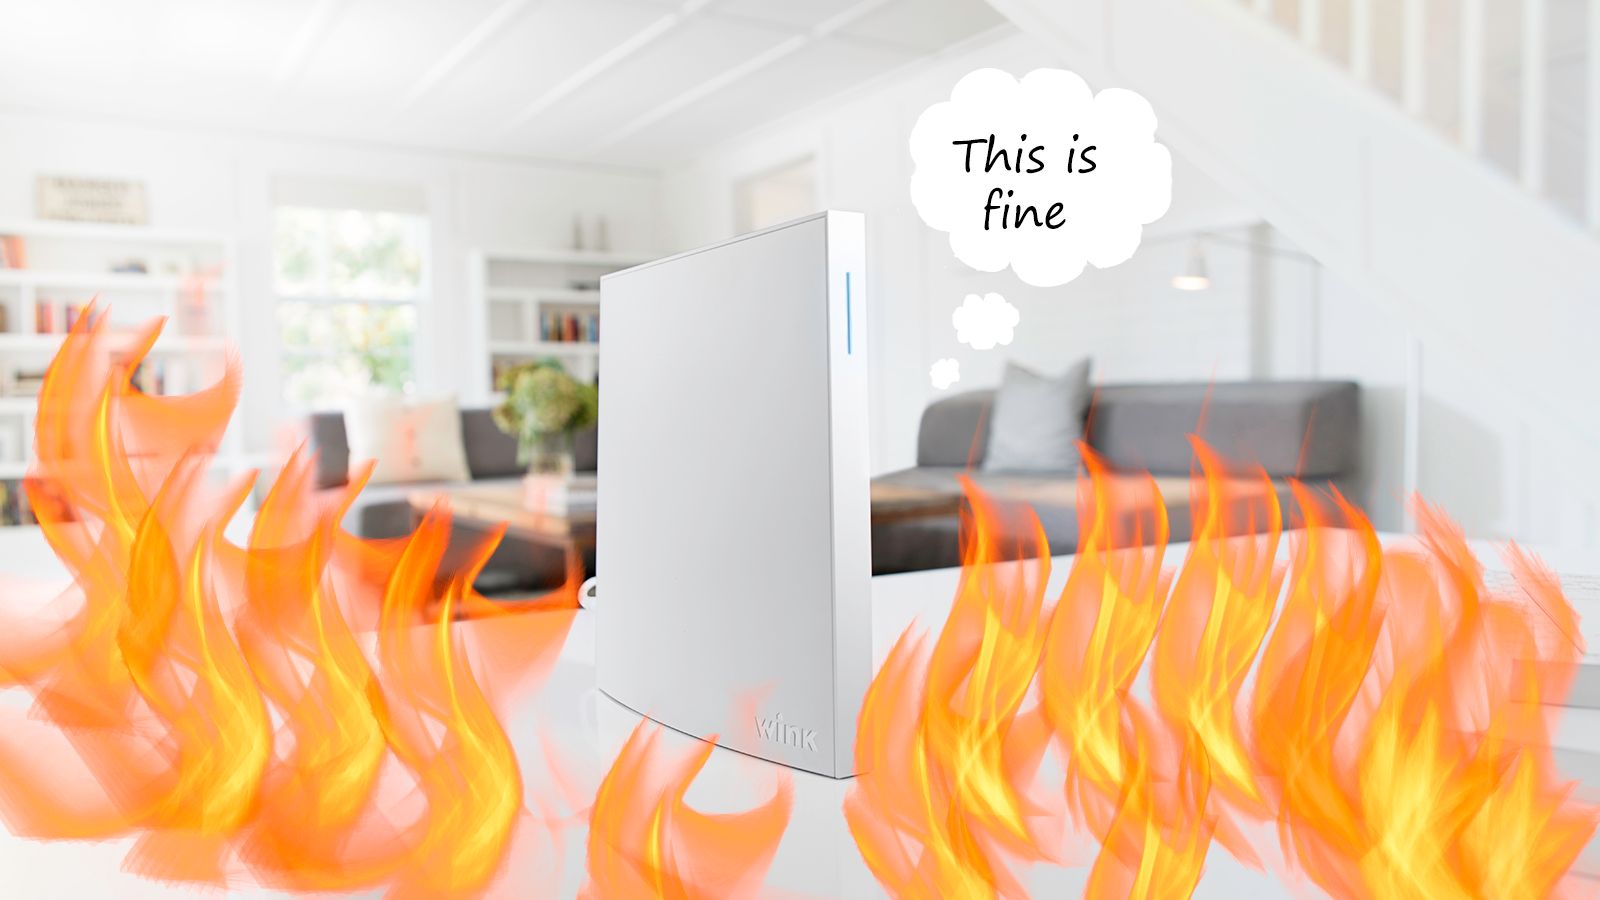 A wink hub surrounded by fire